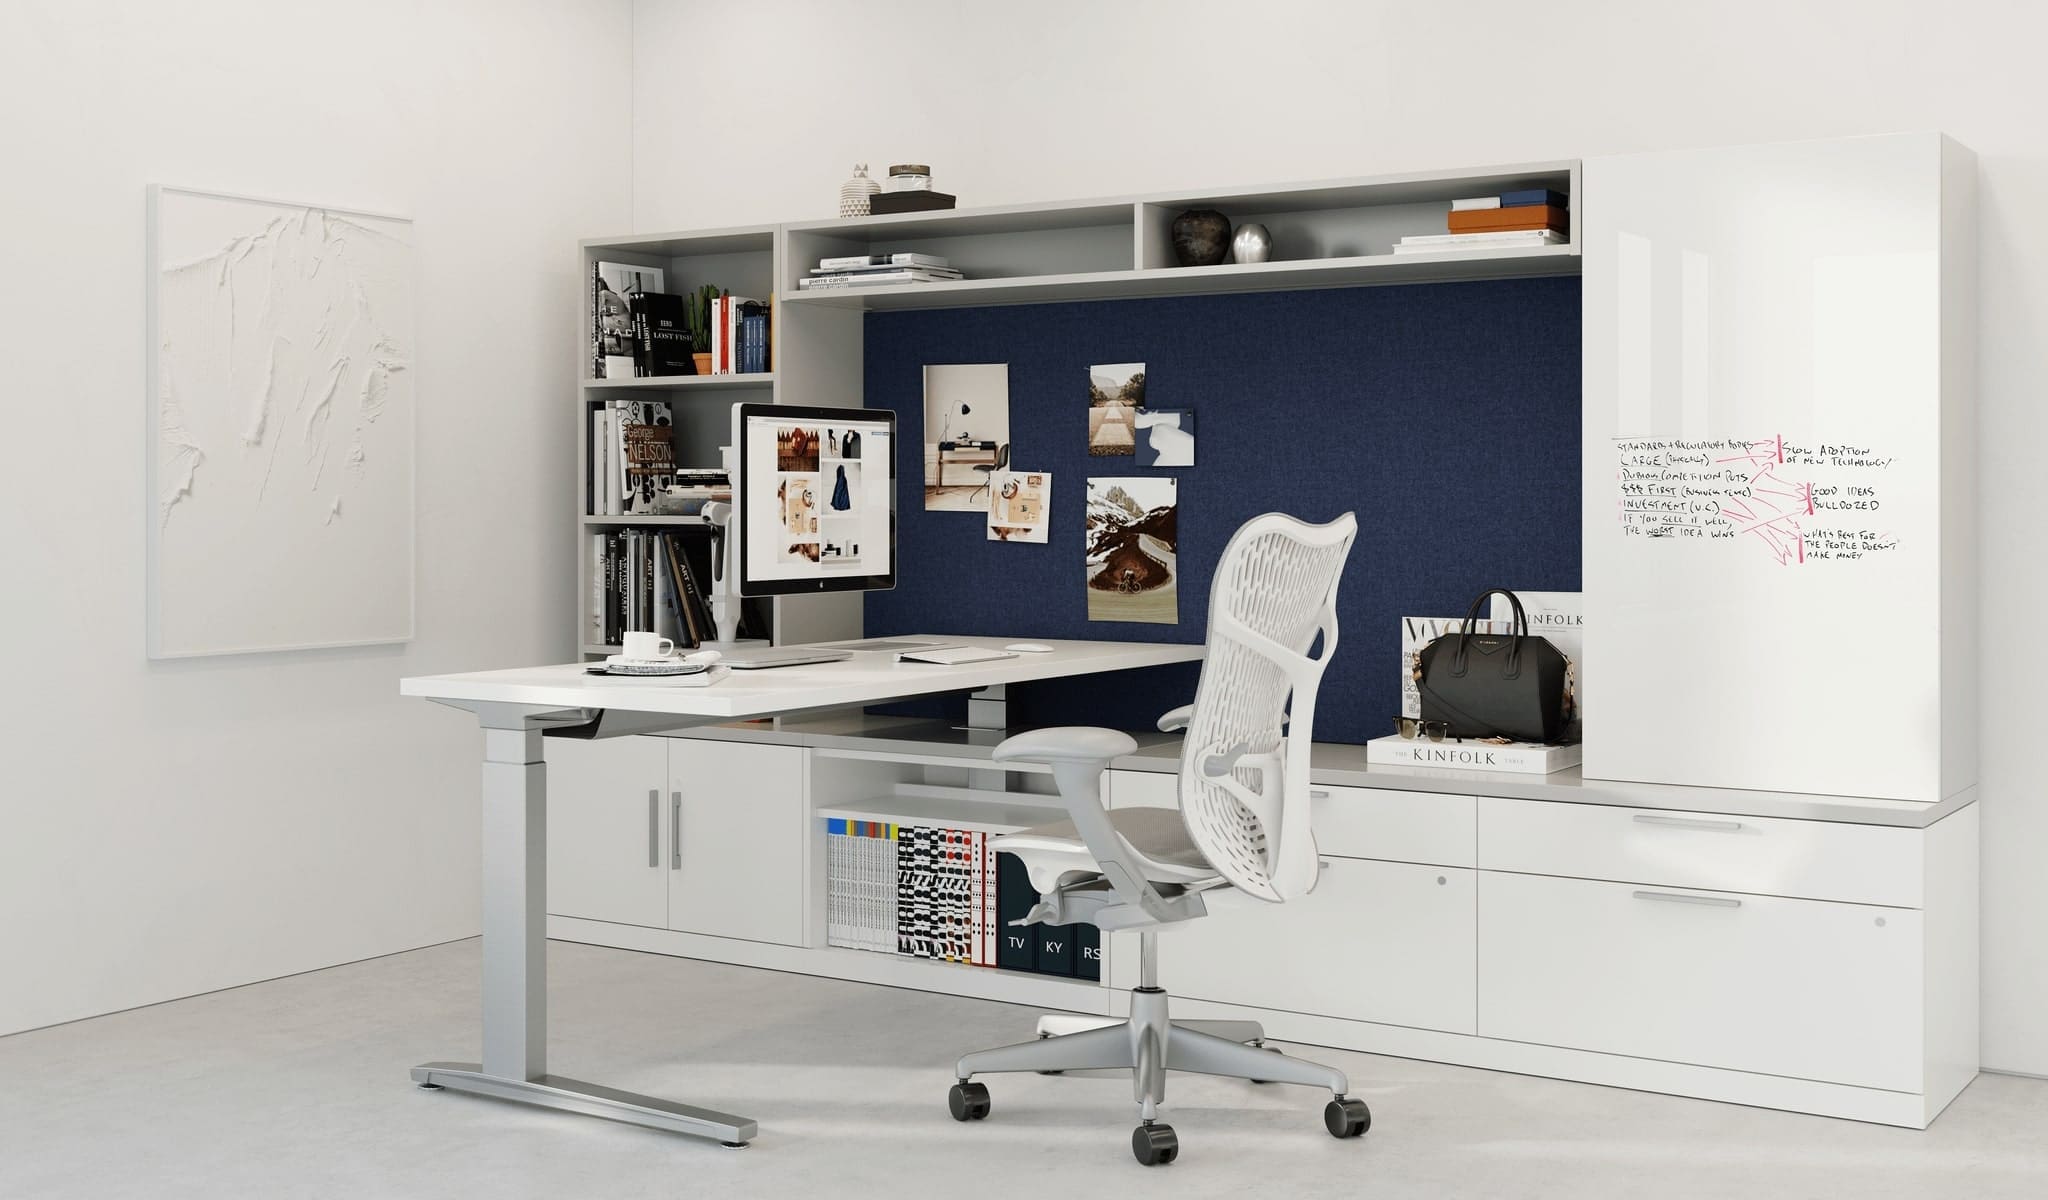 8 Efficient and Ergonomic Office Furniture in New Haven, CT, to Boost Productivity